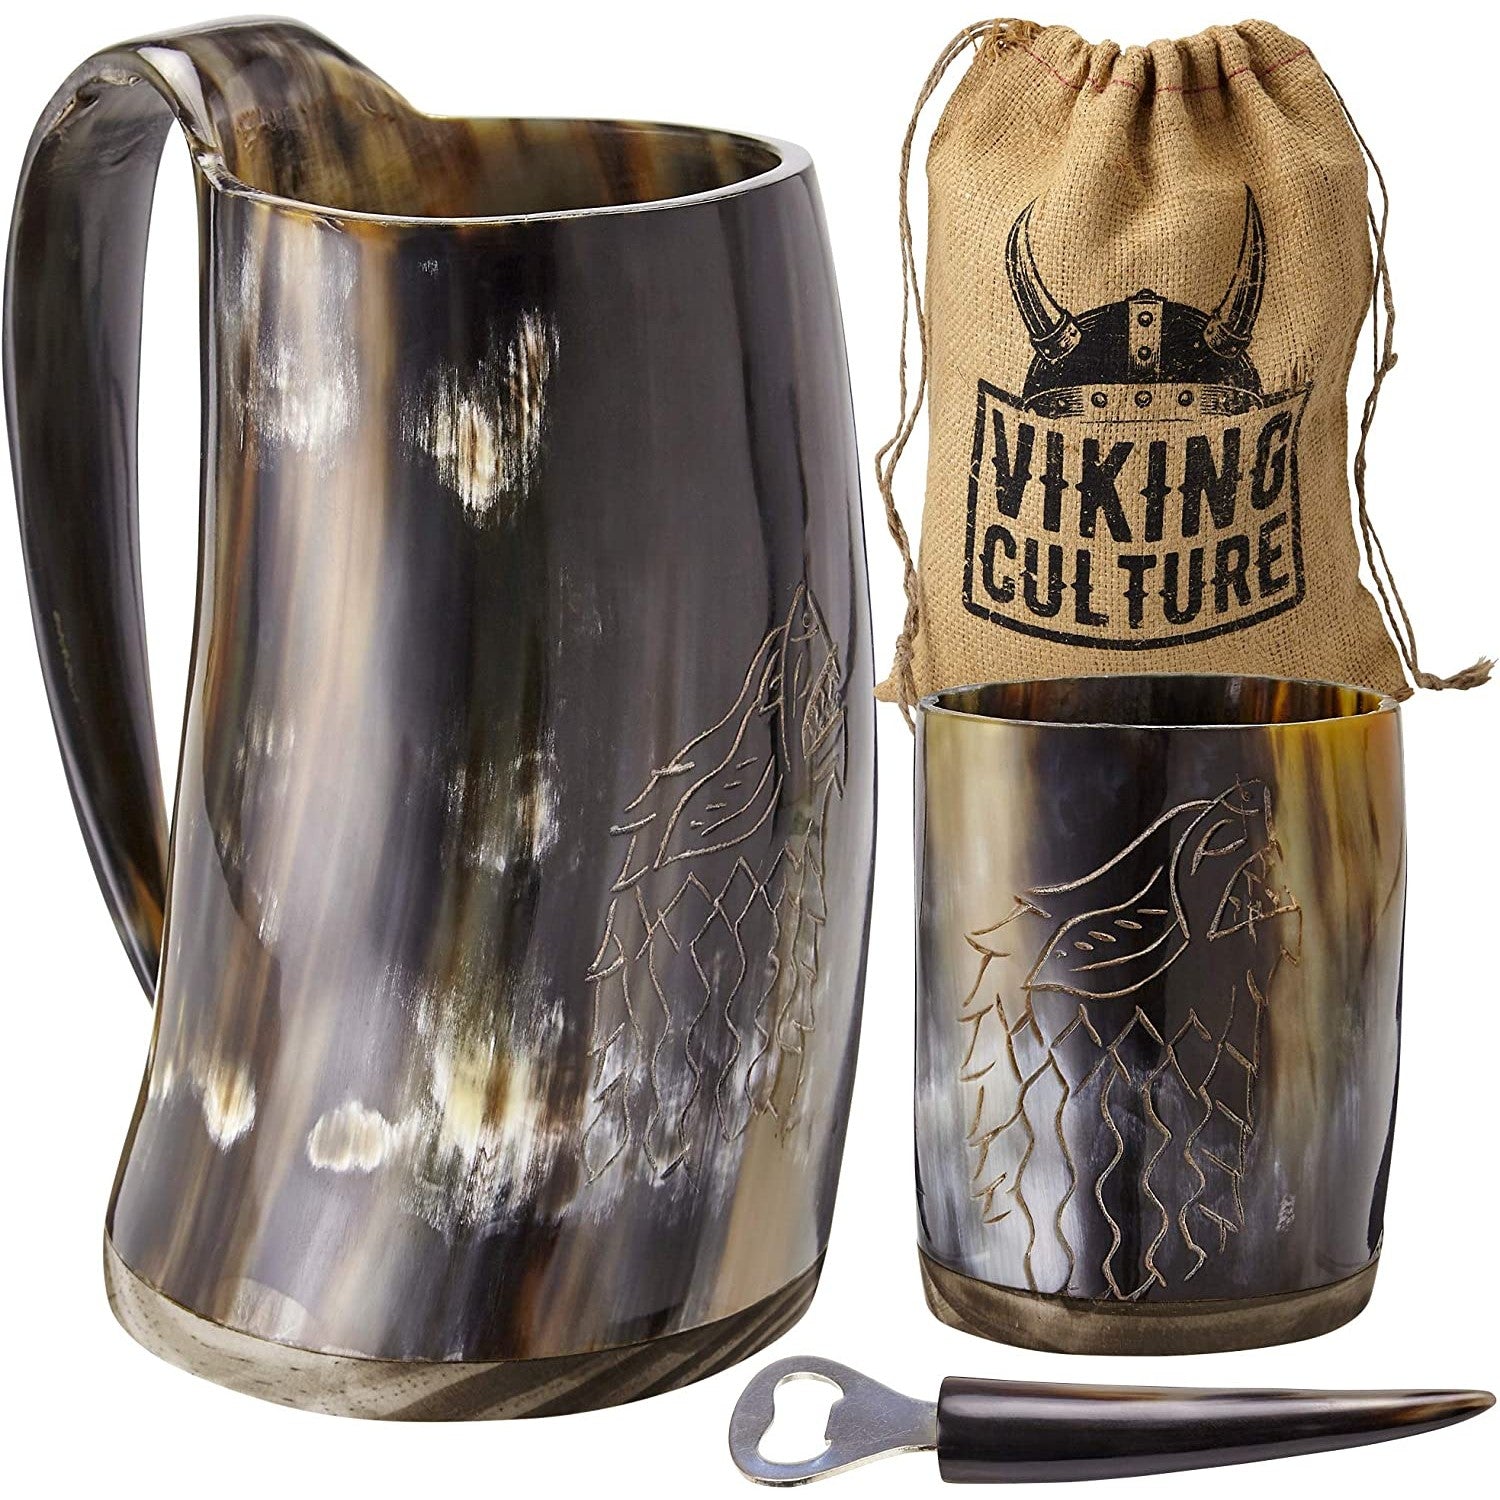 An ox horn beer mug set which includes a genuine ox horn mug, shot glass and bottle opener. A brown drawstring bag is also included.